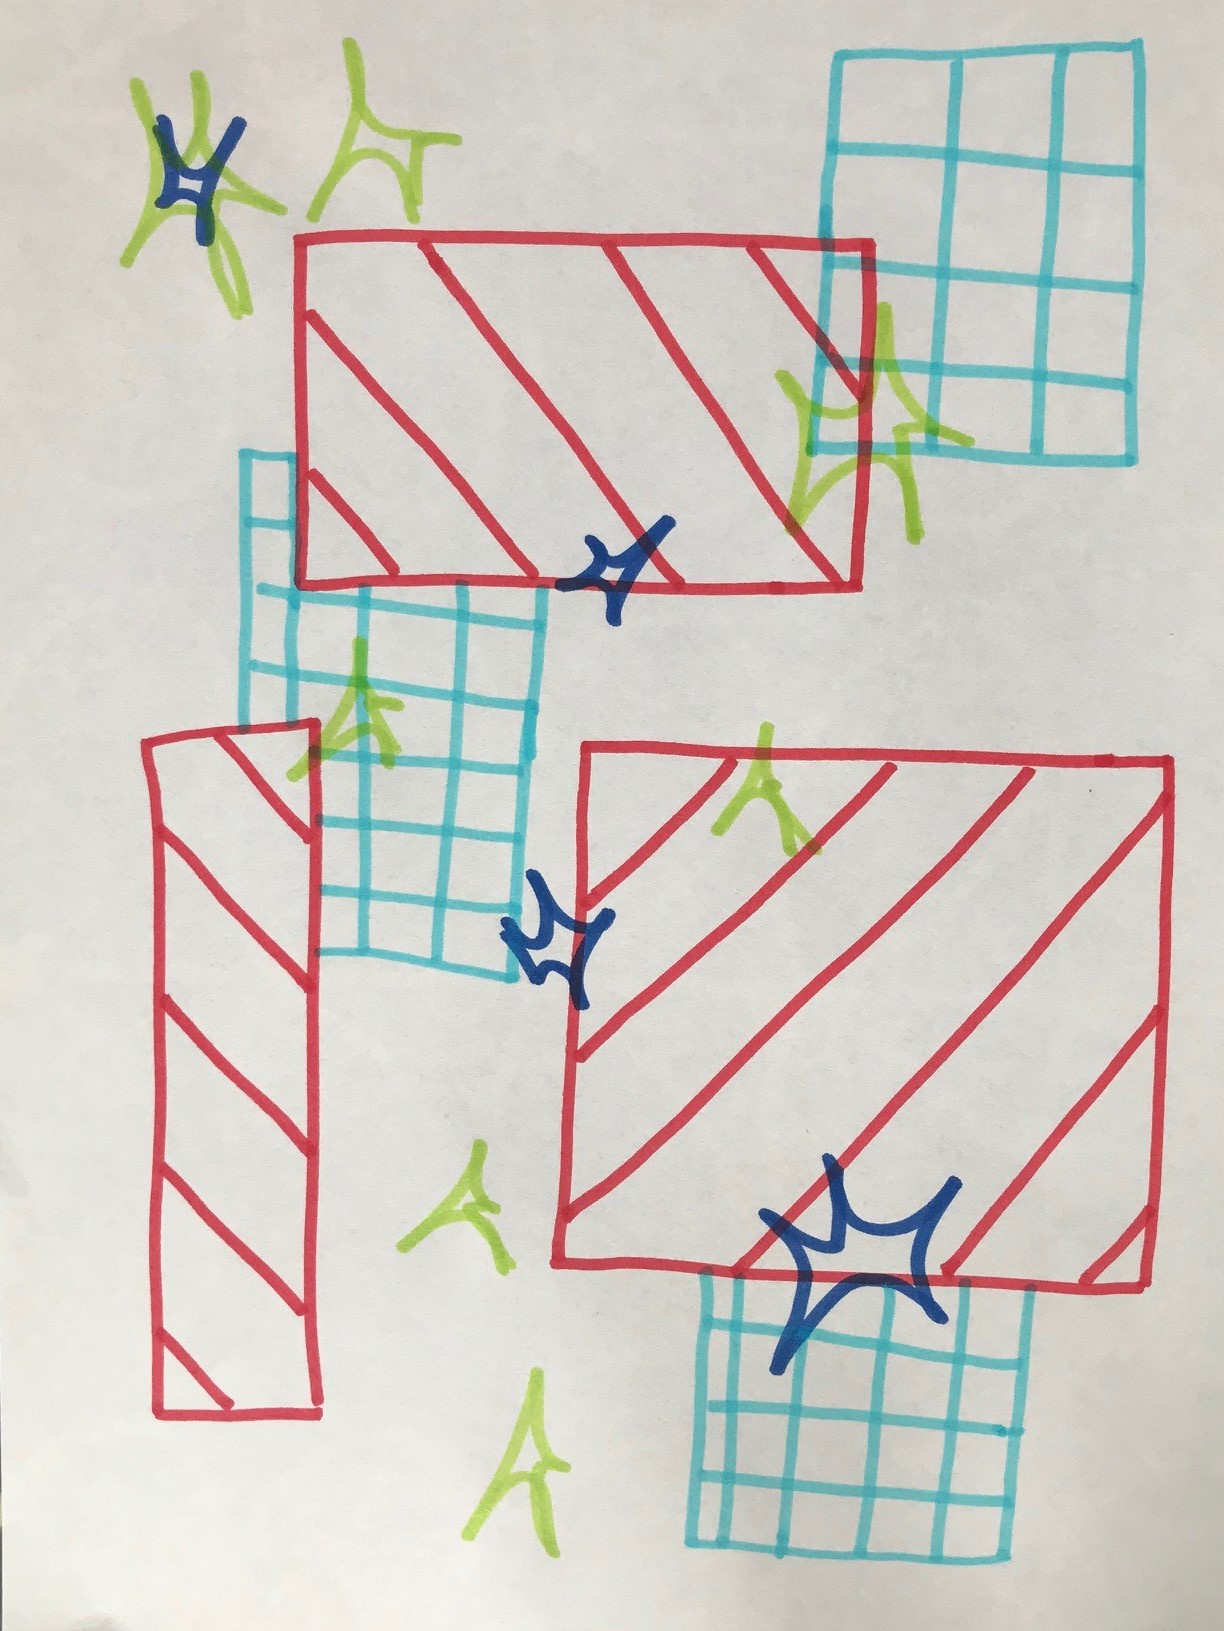 Drawing with red and blue overlapping blocks, green and blue flashes scattered across the drawing.